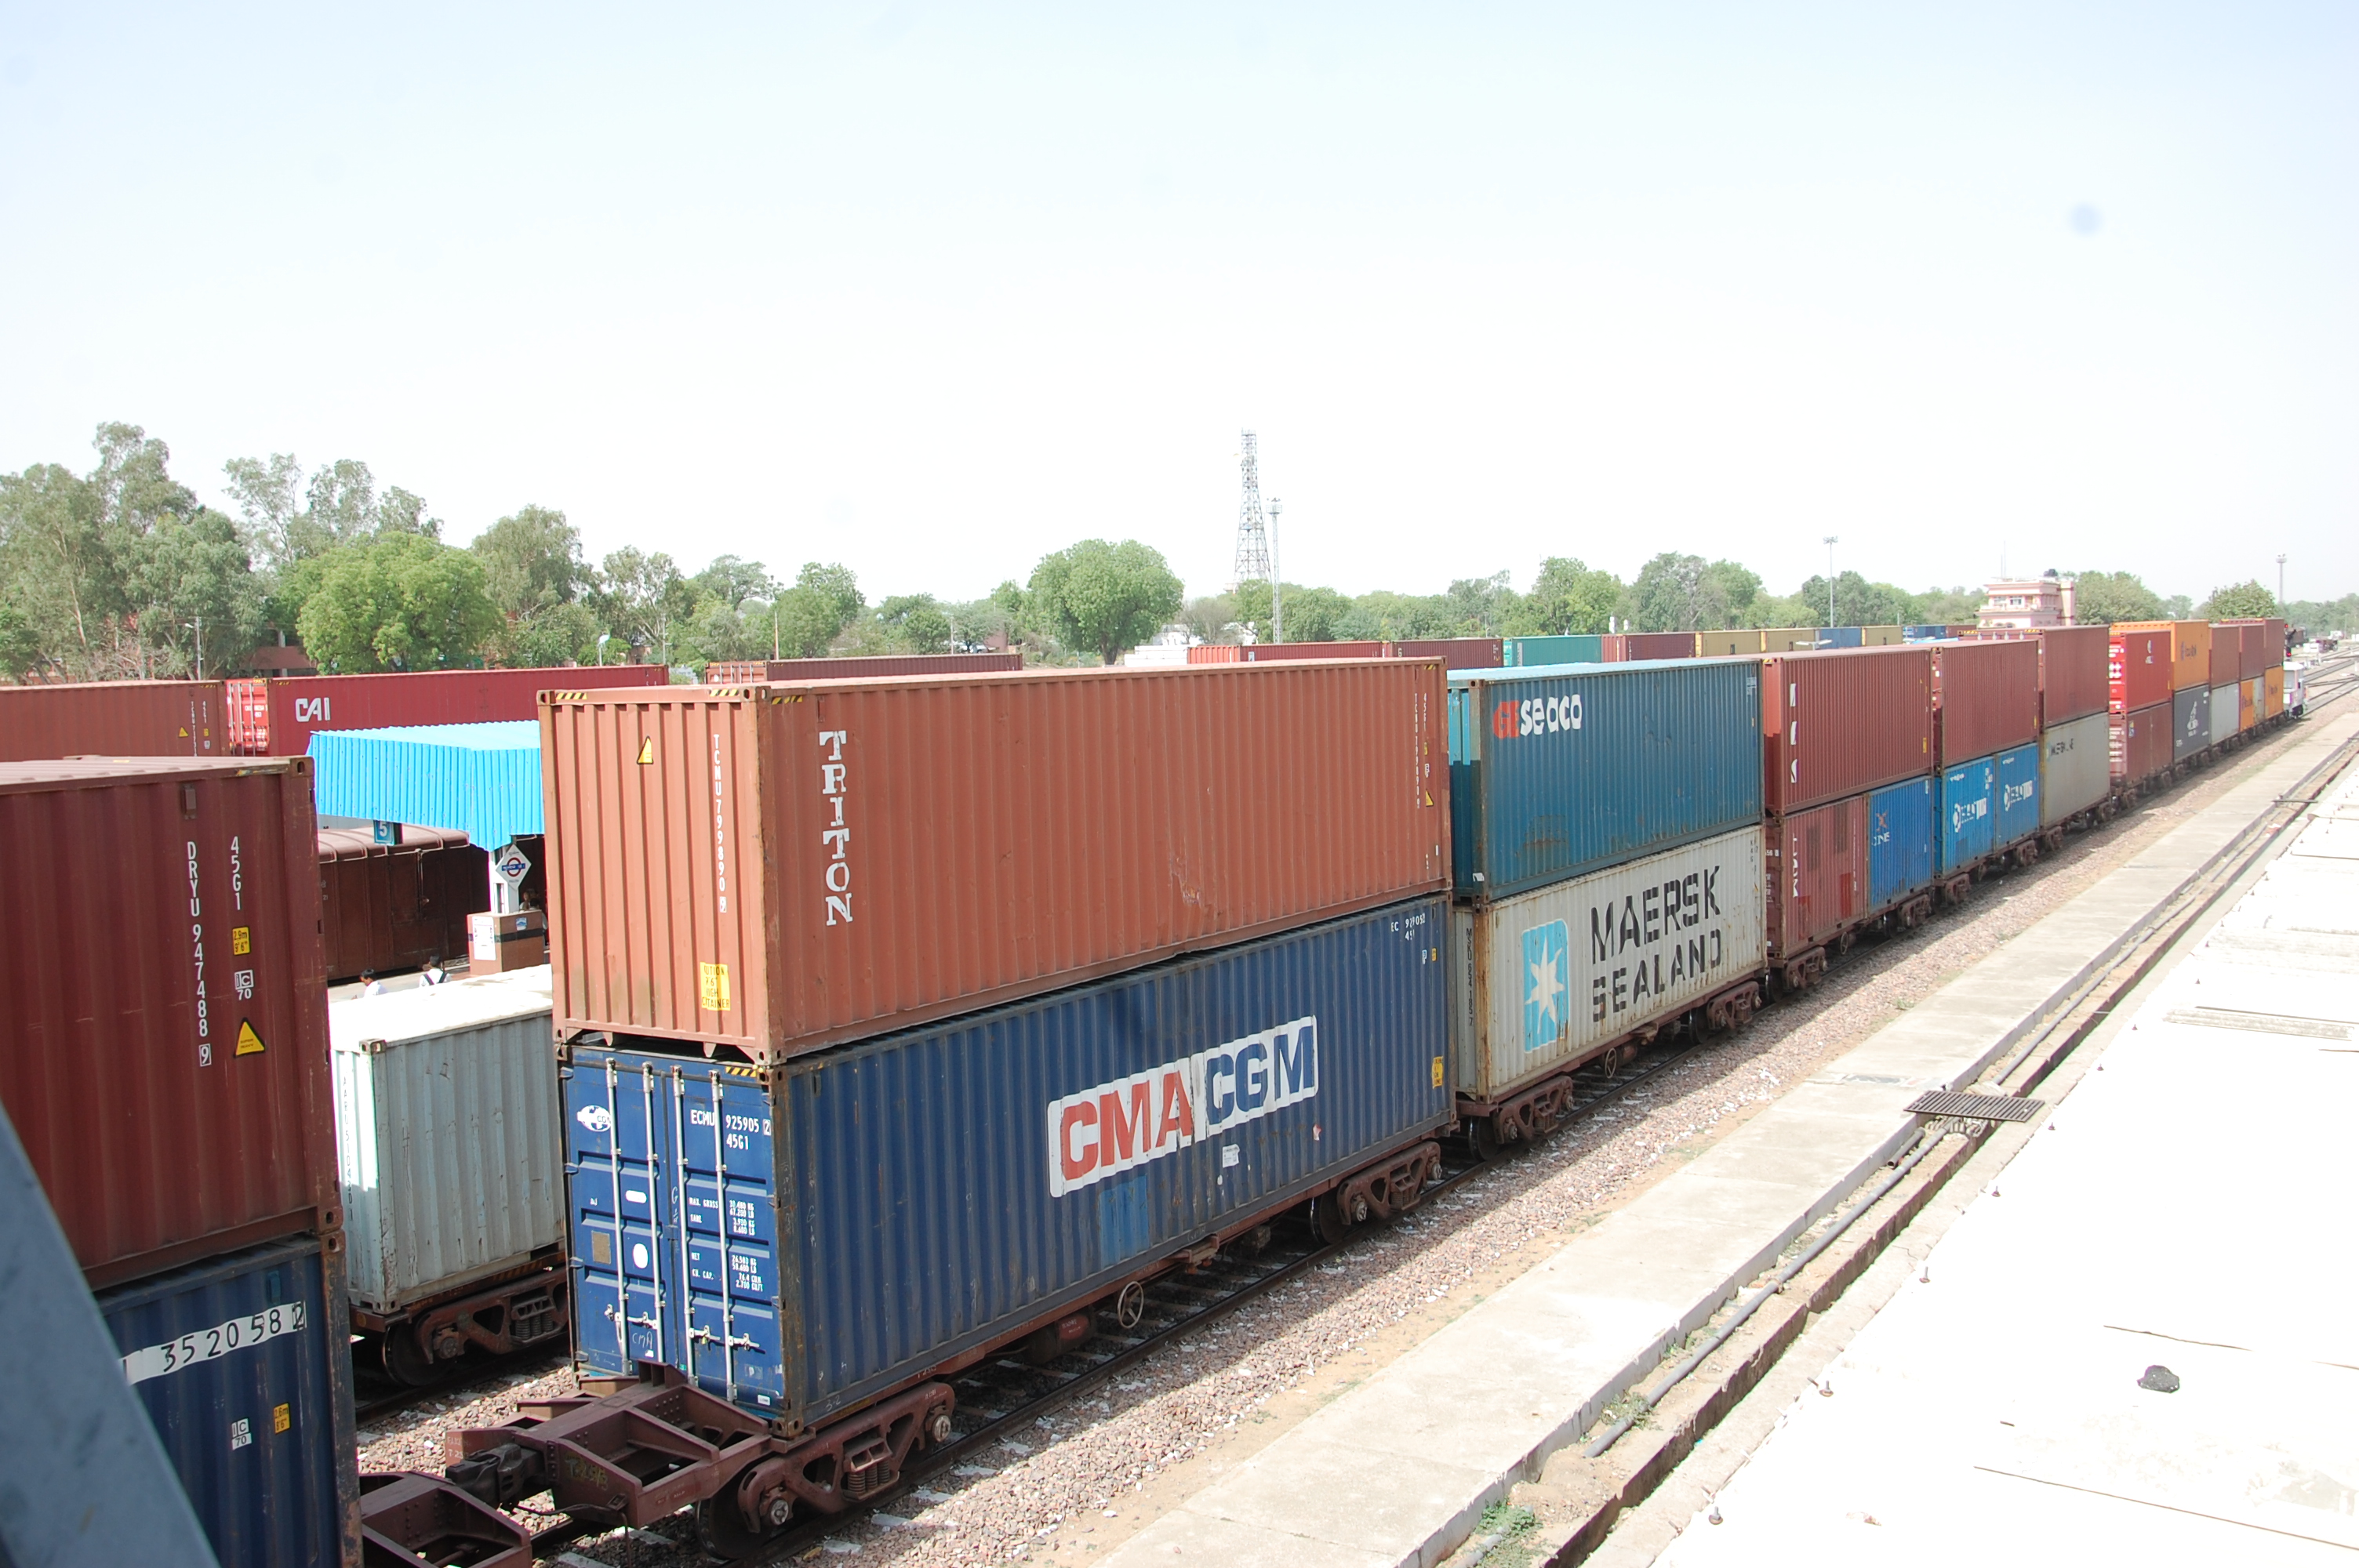 15.88 lakh Metric Ton freight loading during Lockdown on North Western Railway